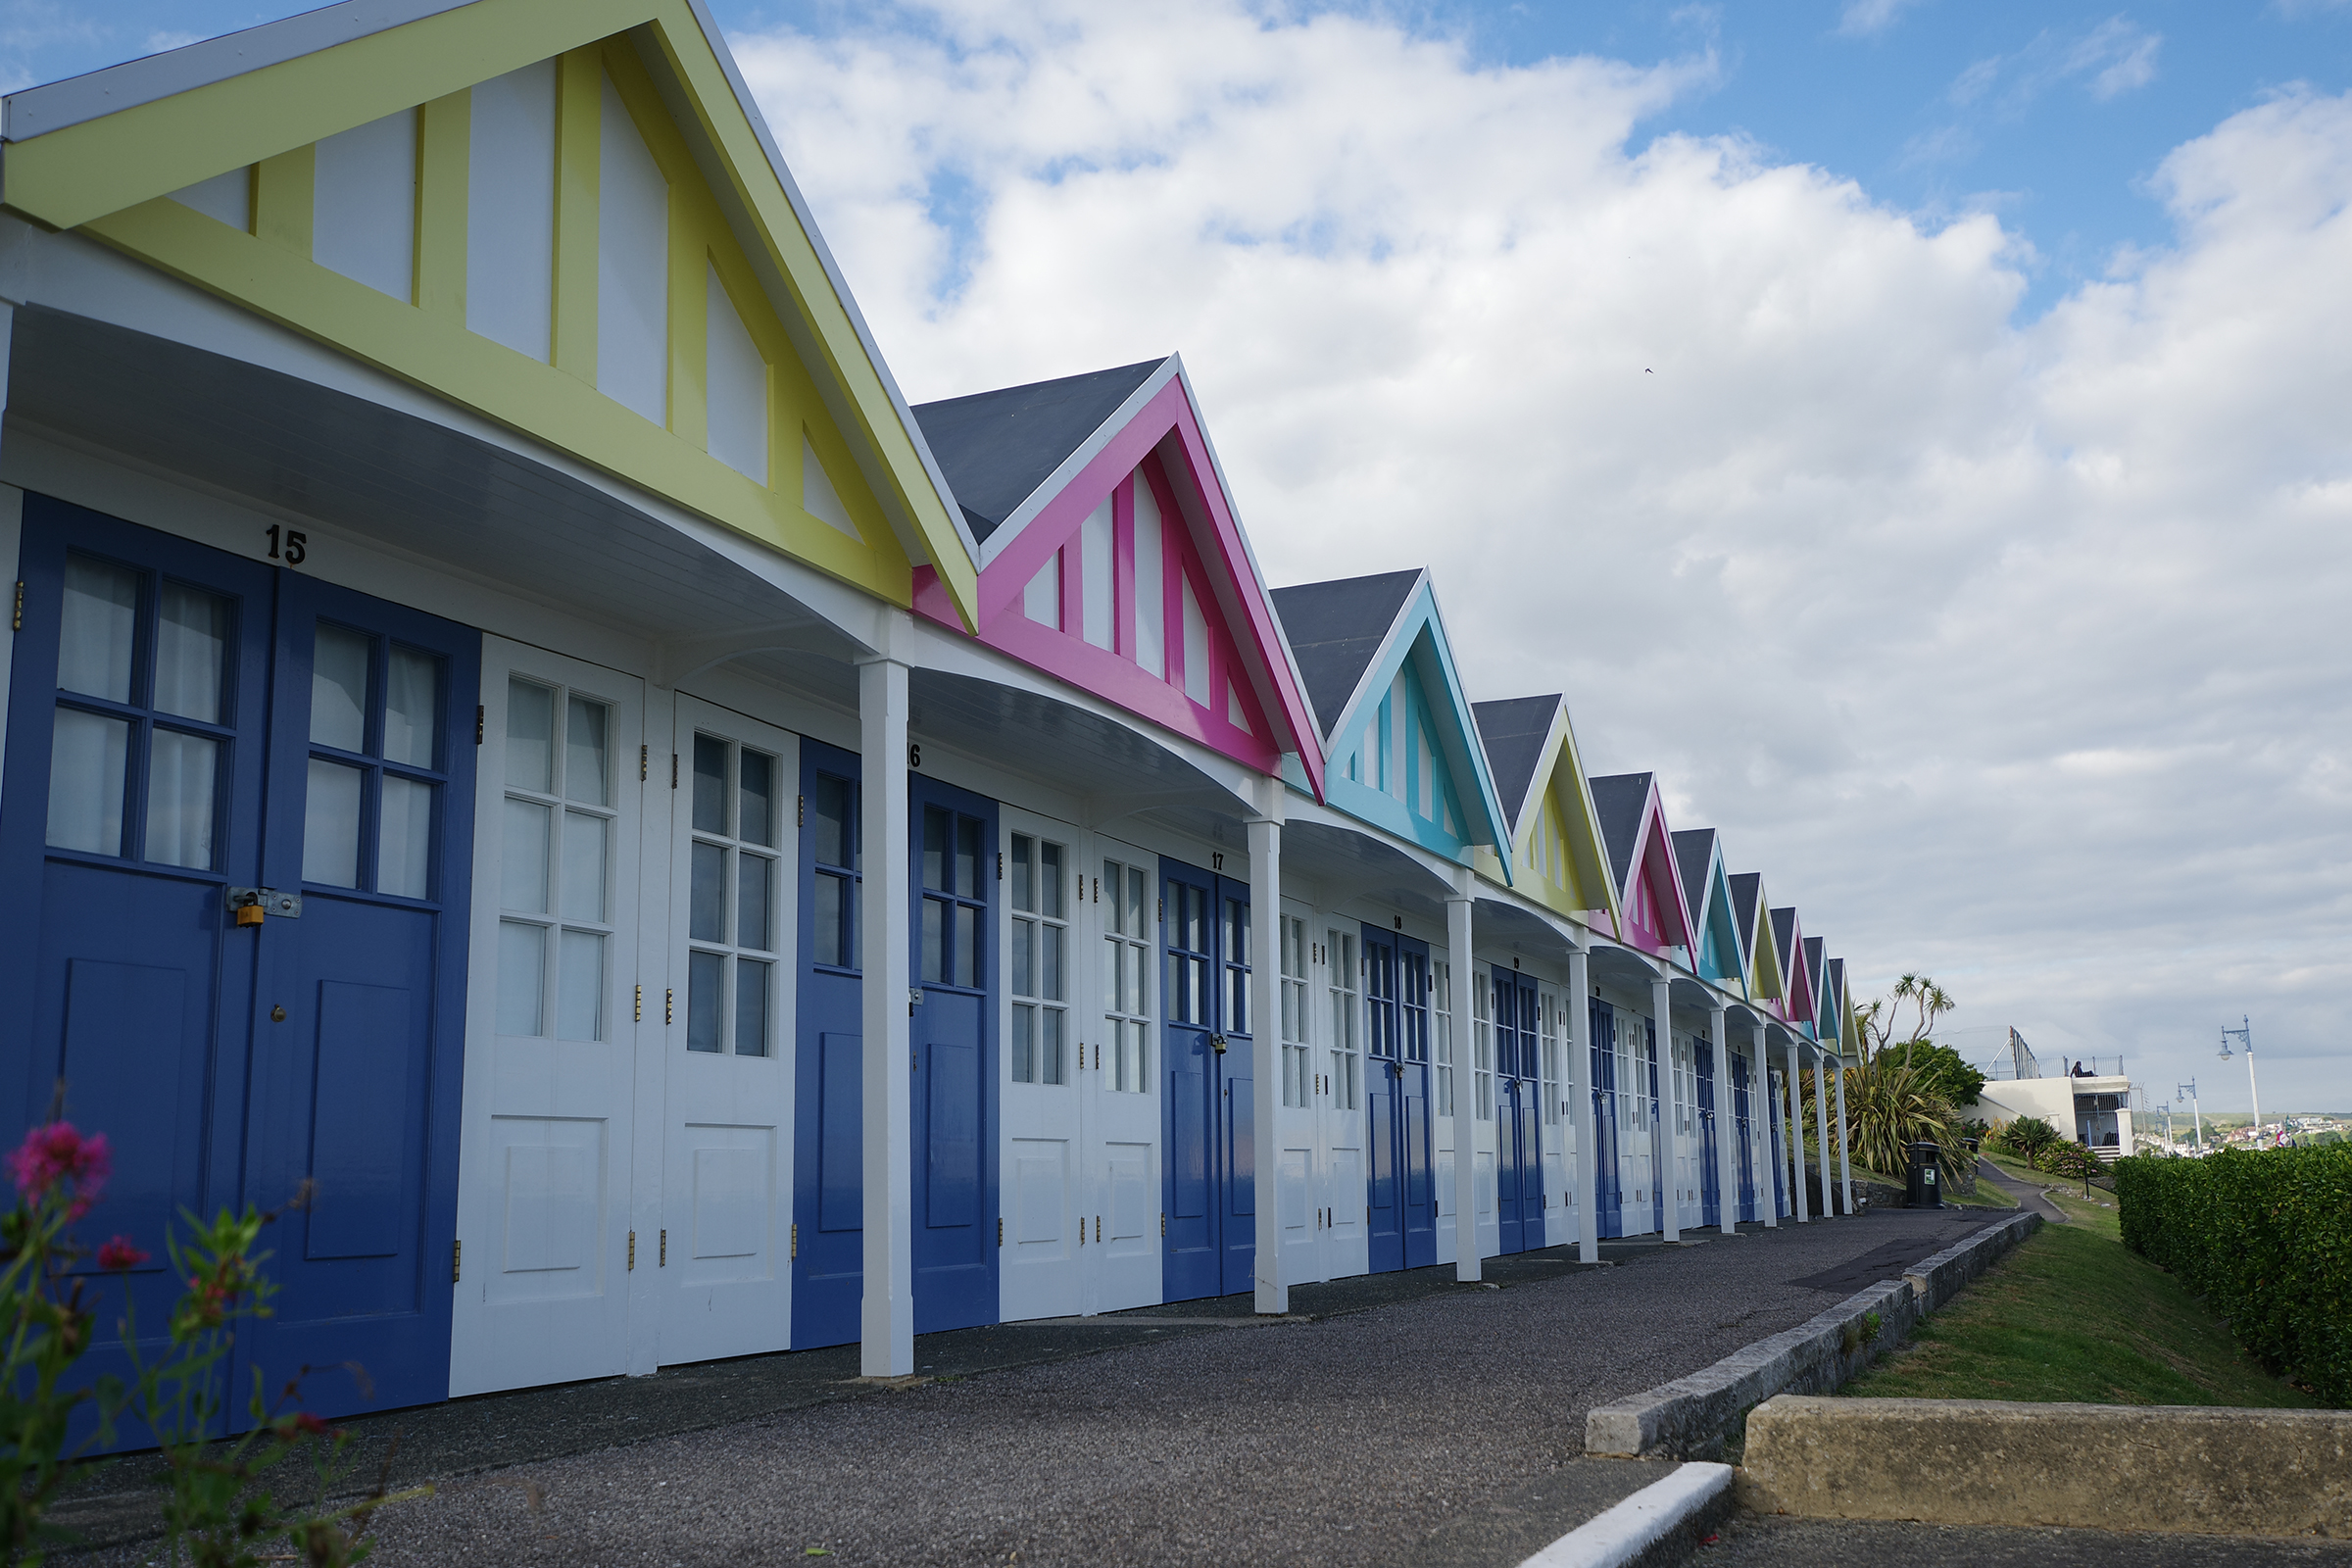 A shot of some beach huts taken with the Pentax K-3 III camera, f/2.8, 1/800, ISO 100